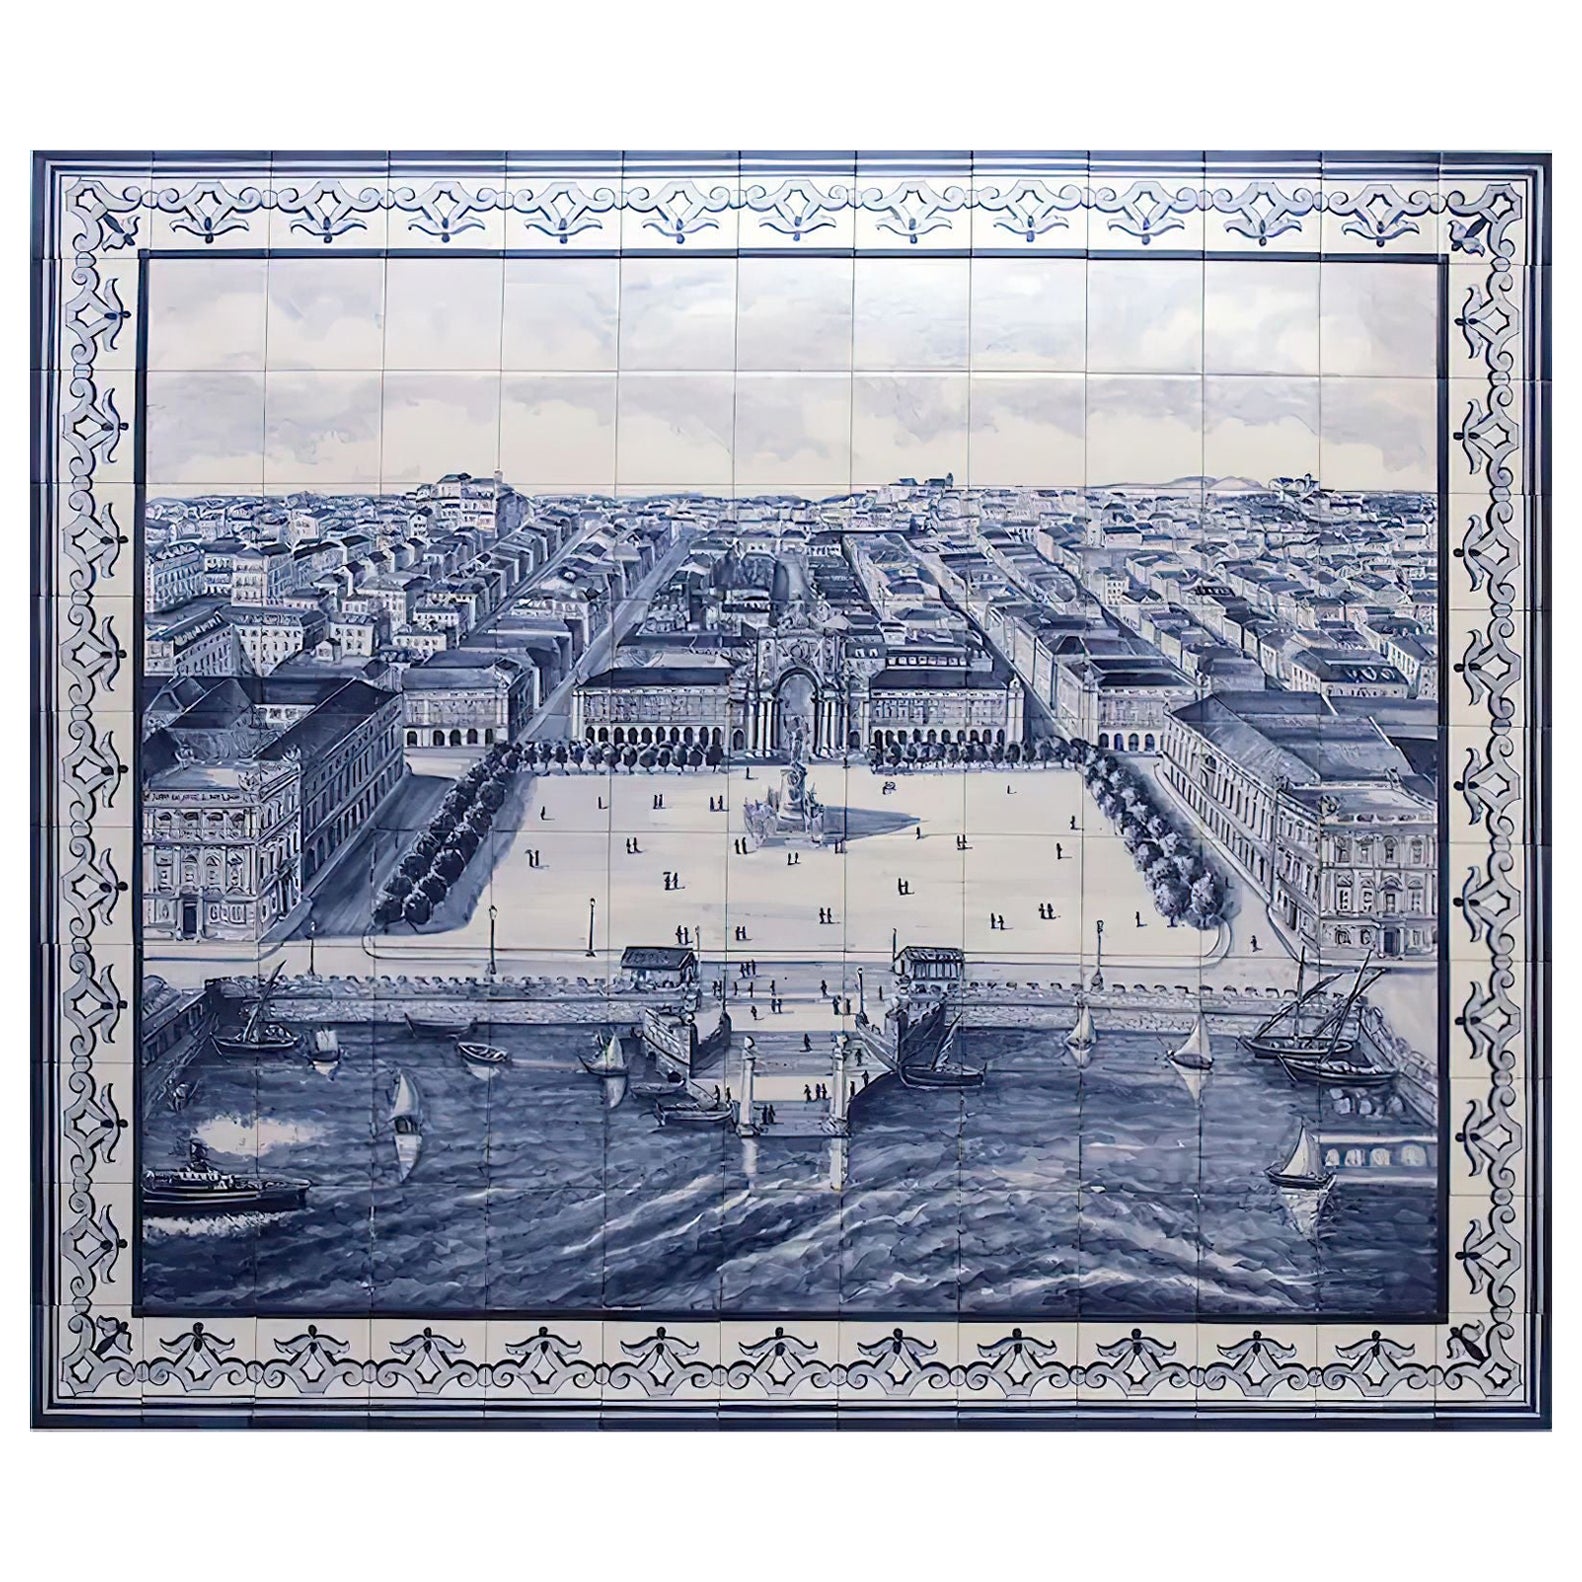 Azulejos Portuguese Hand Painted Tile Mural "Lisbon Portugal" Signed by Artist  For Sale